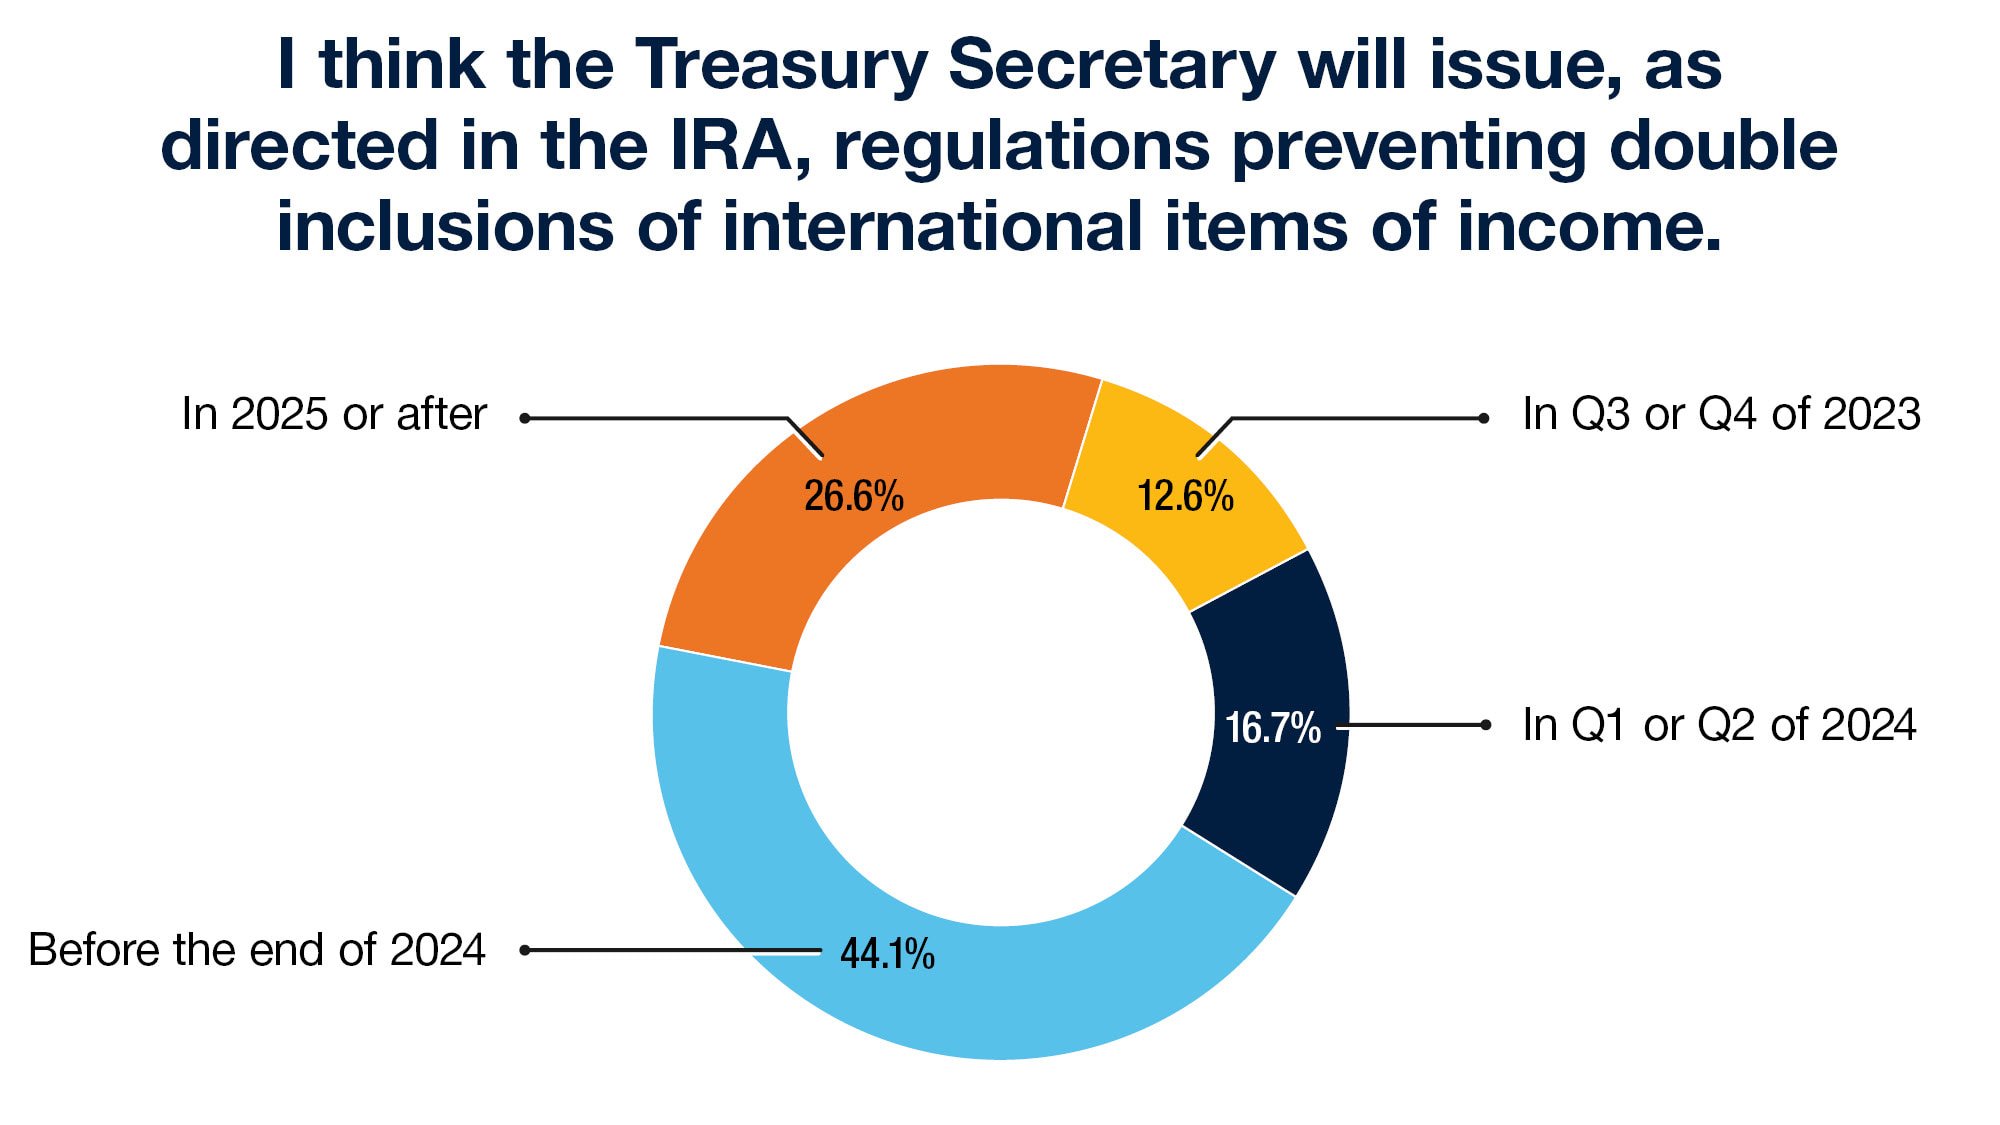 I think the Treasury Secretary will issue, as directed in the IRA, regulations preventing double inclusions of international items of income. 